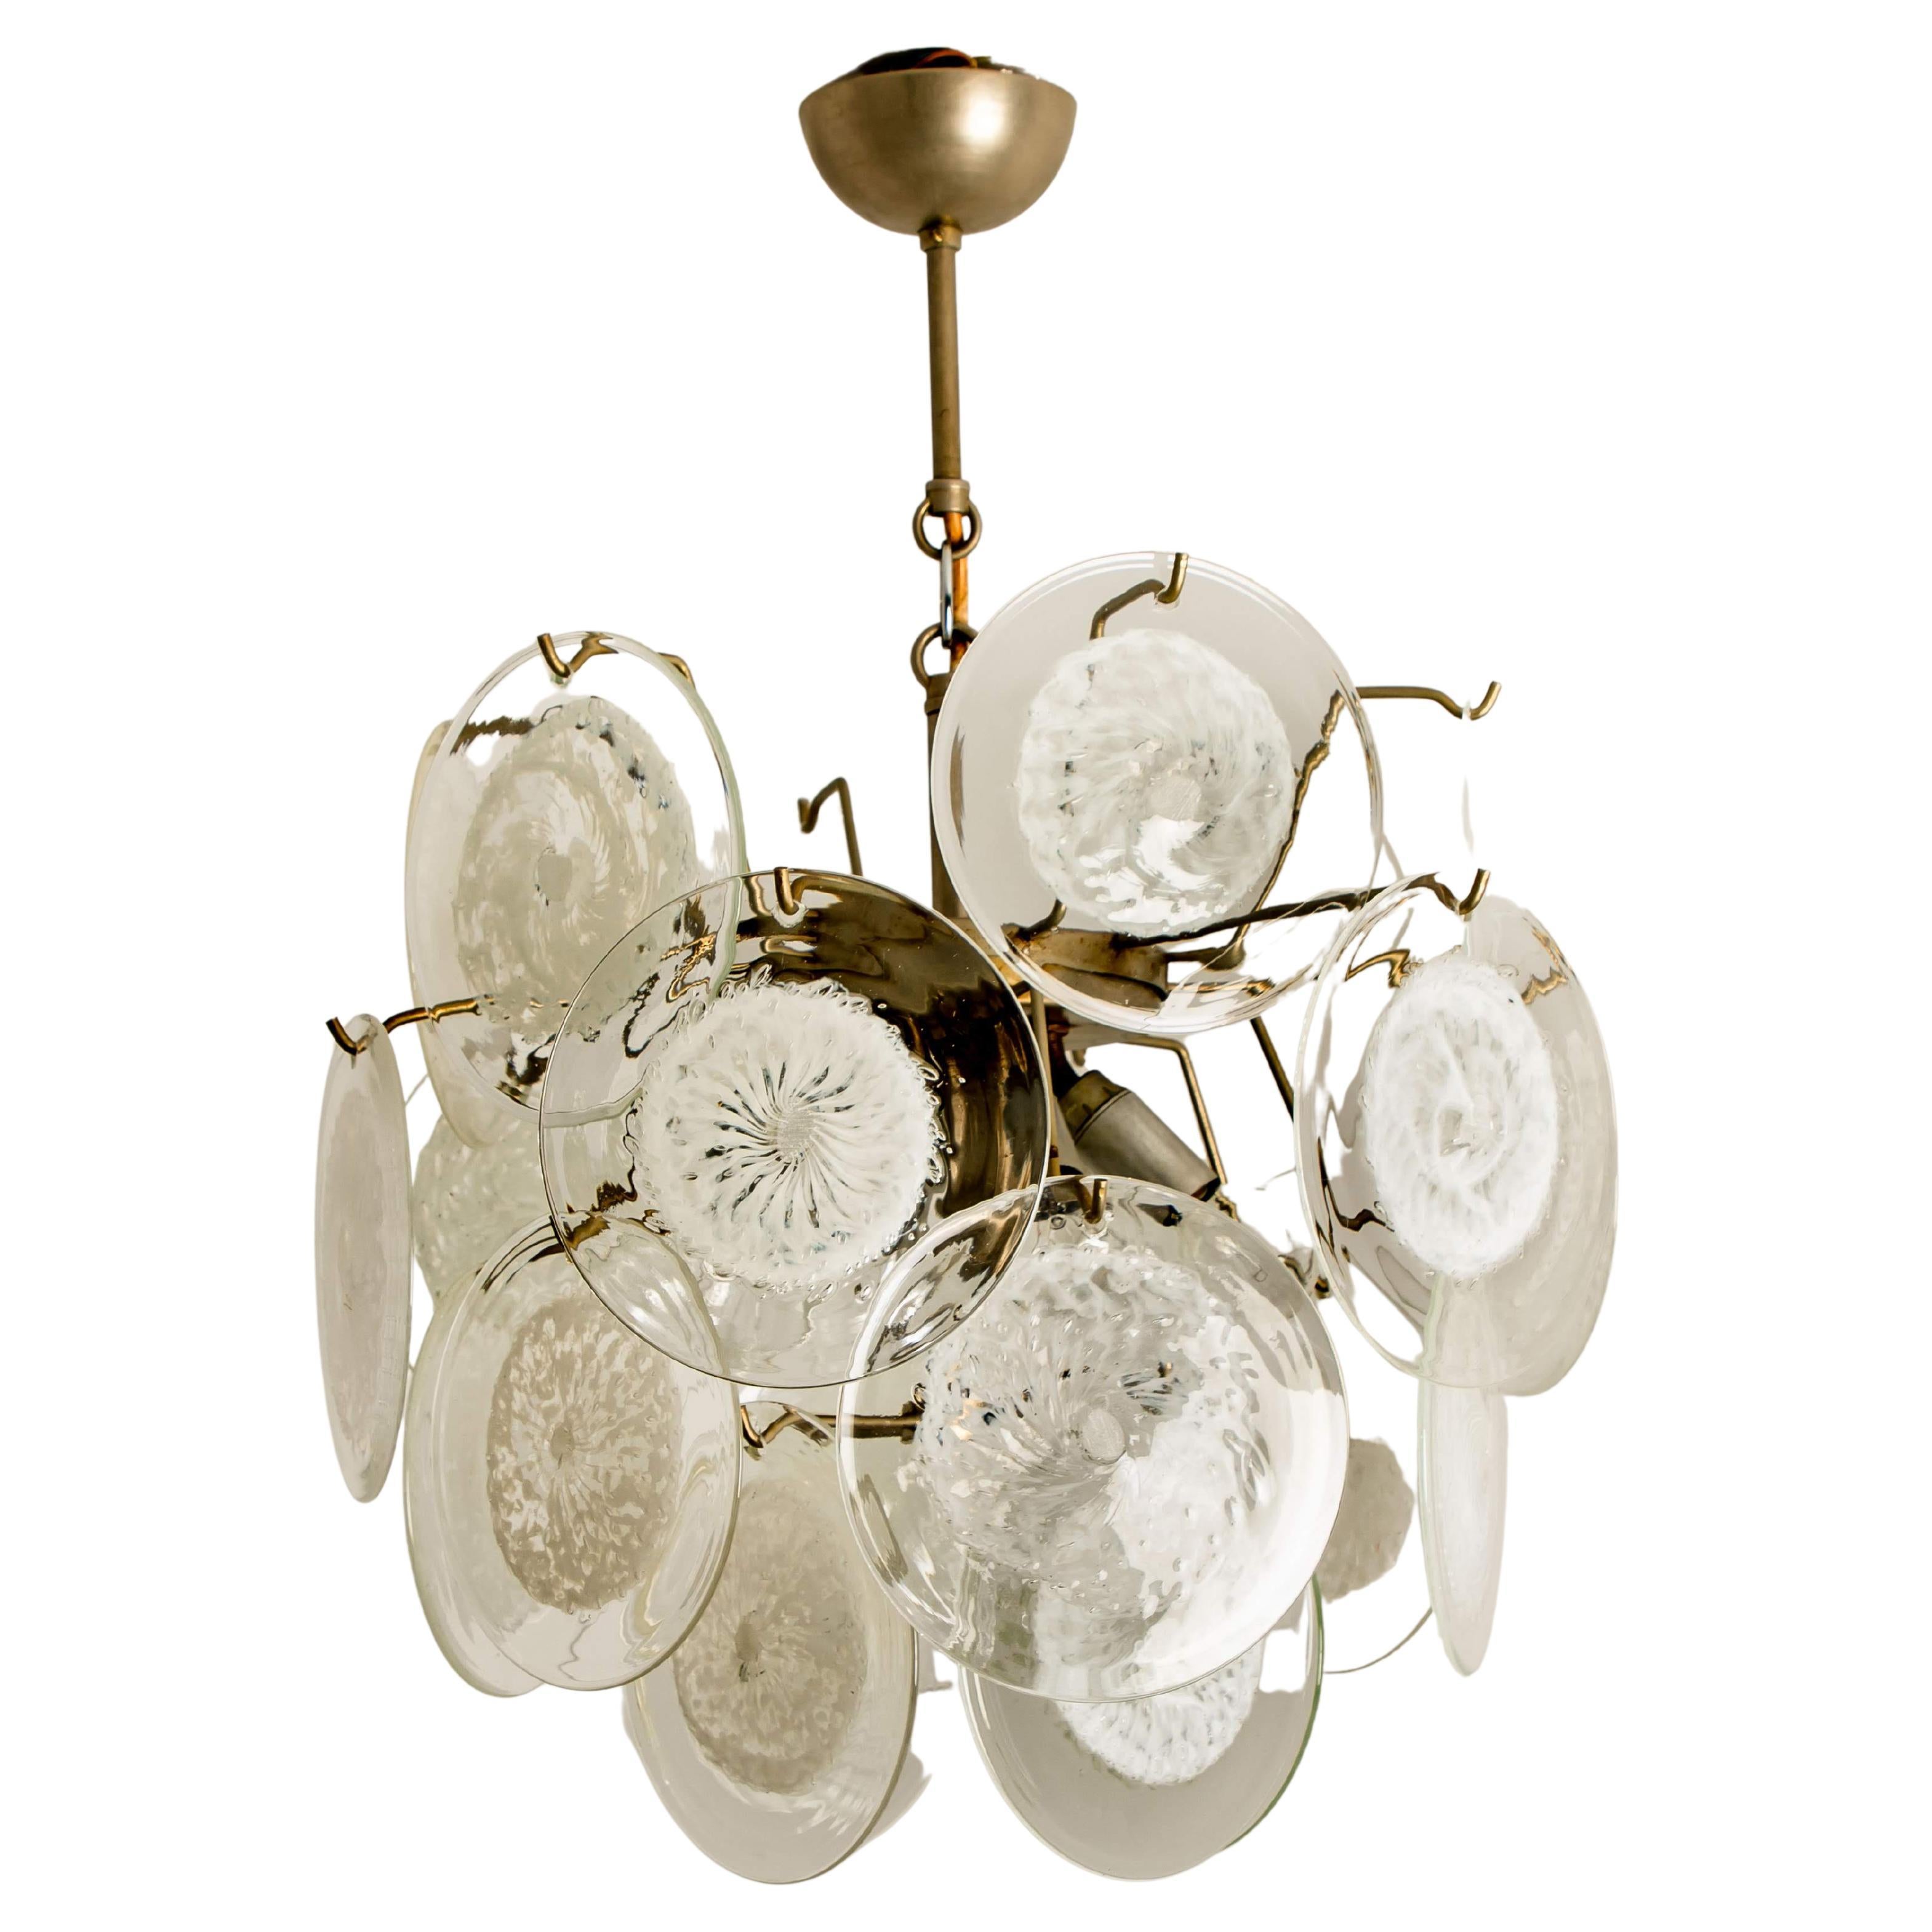 A gorgeous four tiers hanging light fixture, attributed to Vistosi, Italy, manufactured in circa 1970 (late 1960s and early 1970s). With graduated tiers of smoked round facet chaped glass discs framed by half moon shaped brass. The chandelier is